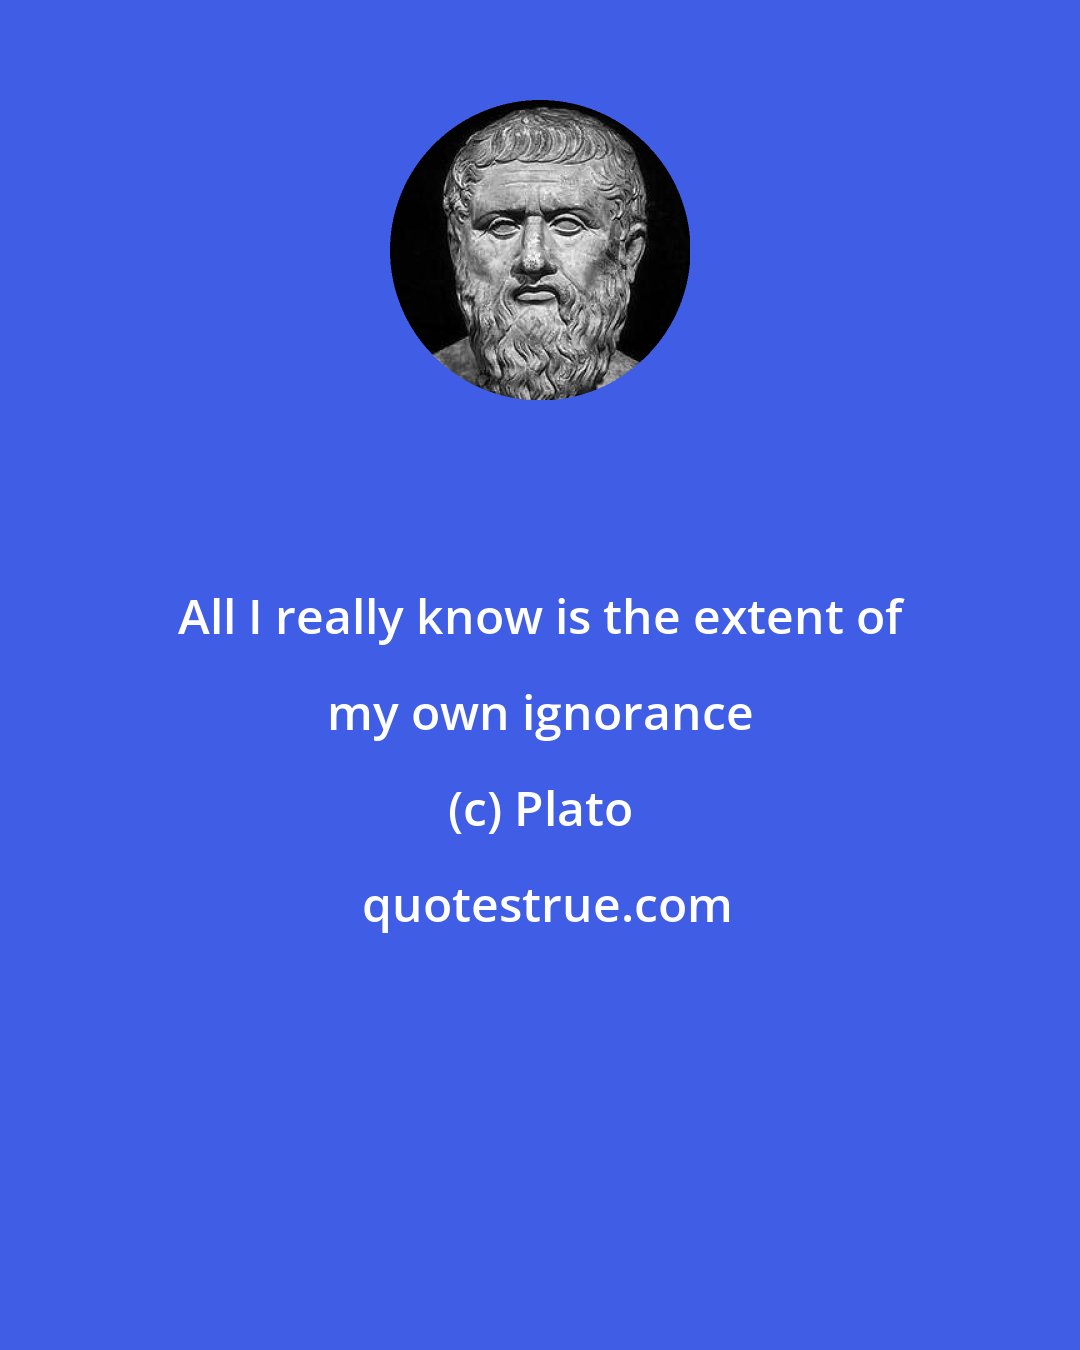 Plato: All I really know is the extent of my own ignorance